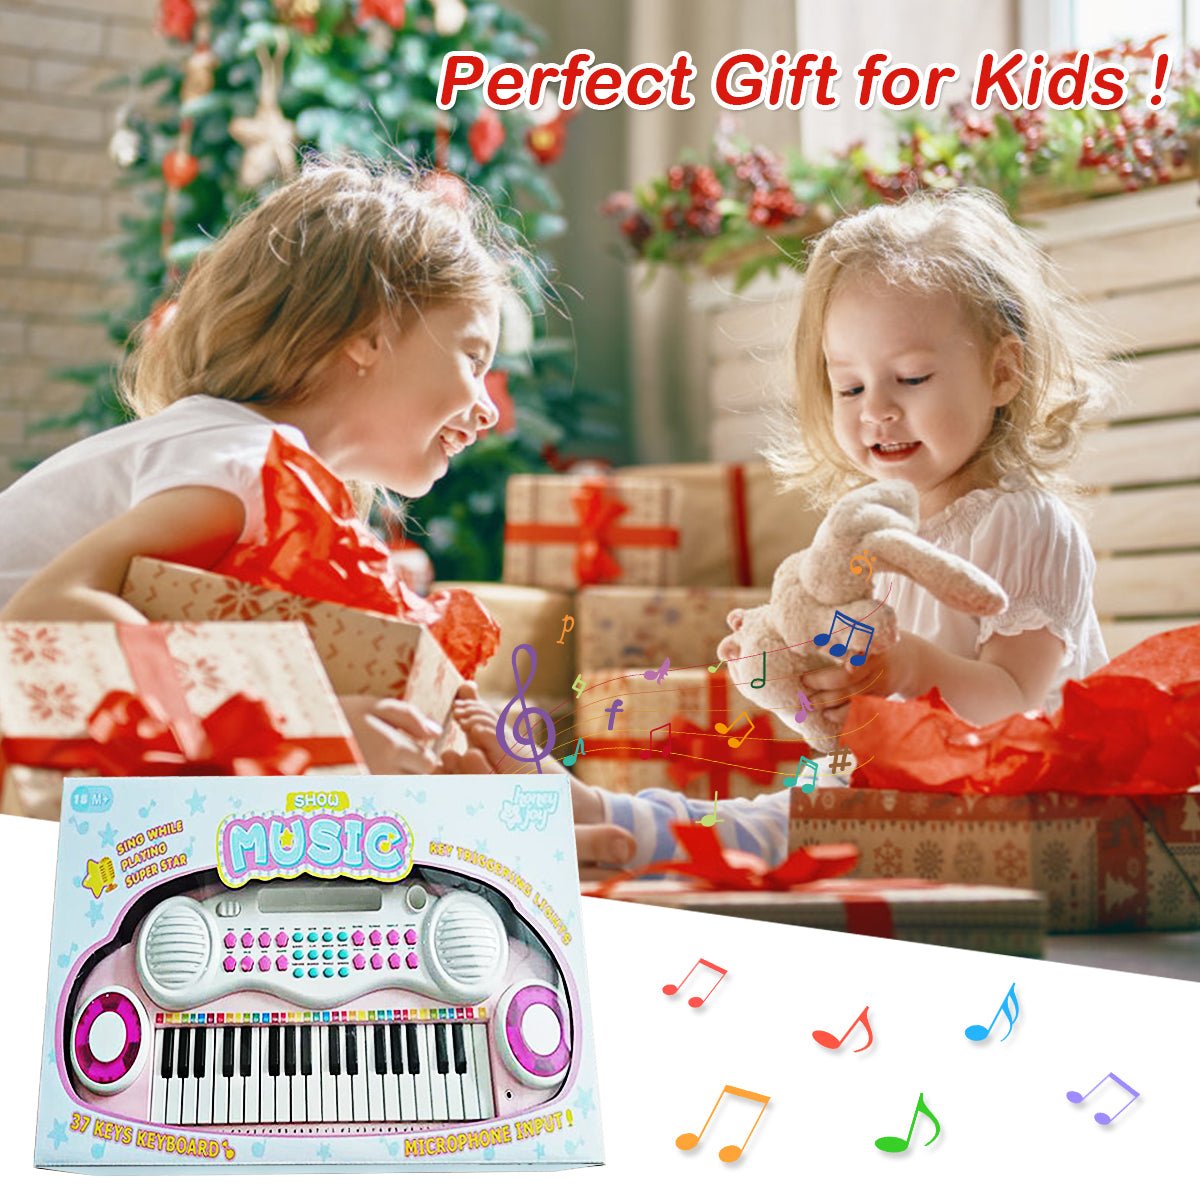 Kids Mega Mart: Your Source for Musical Fun with Pink Keyboards